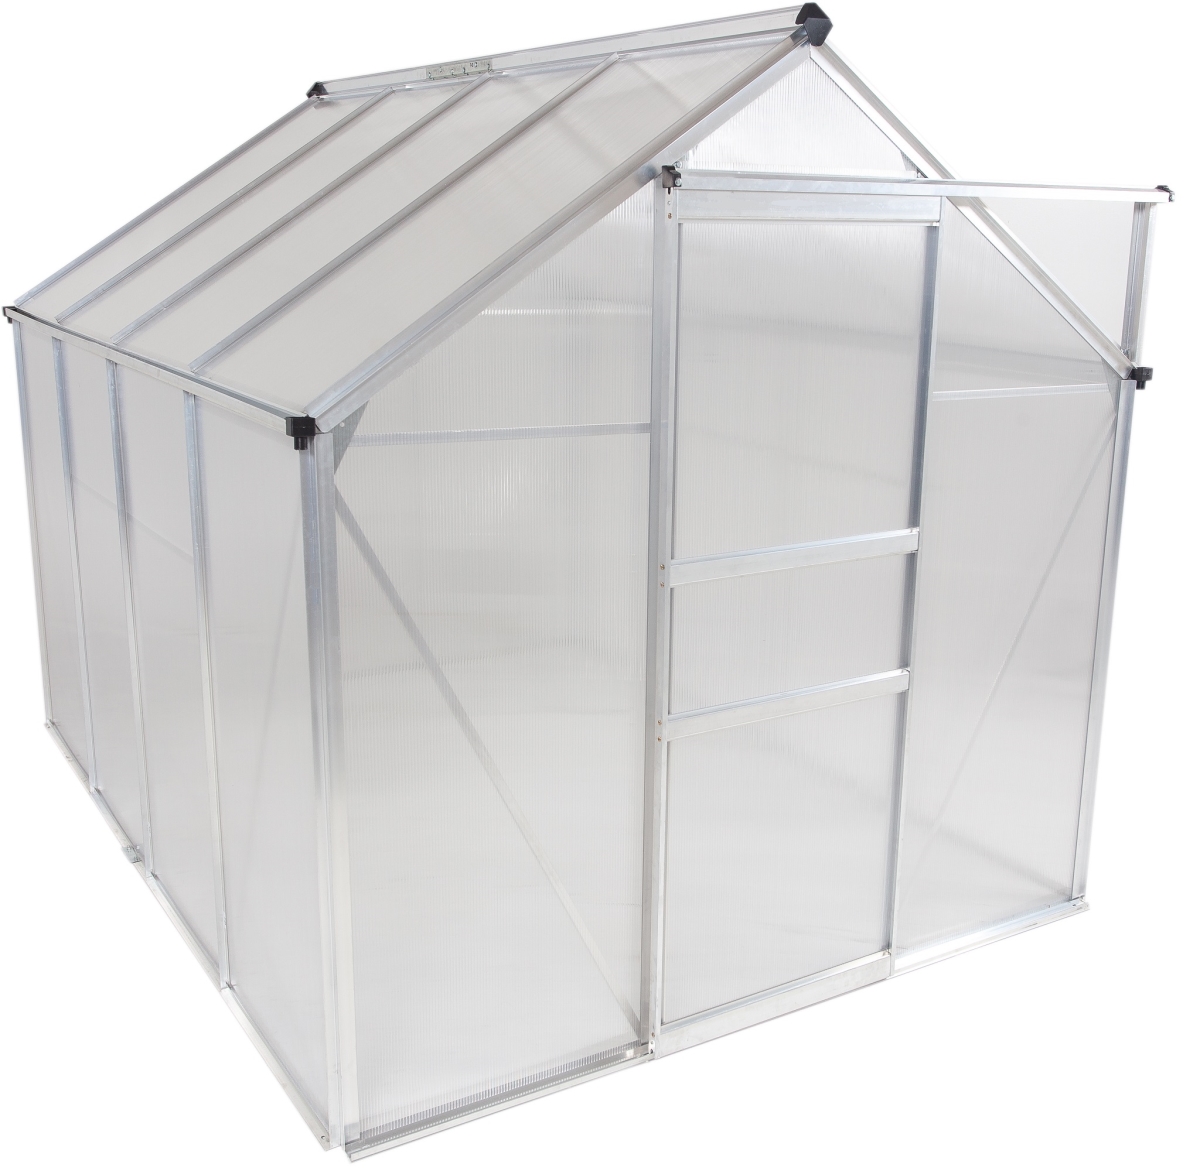 Picture of Ogrow OGAL-866A 6 x 8 ft. Ogrow Lawn & Garden Greenhouse with Walk-in Heavy Duty Aluminum Frame